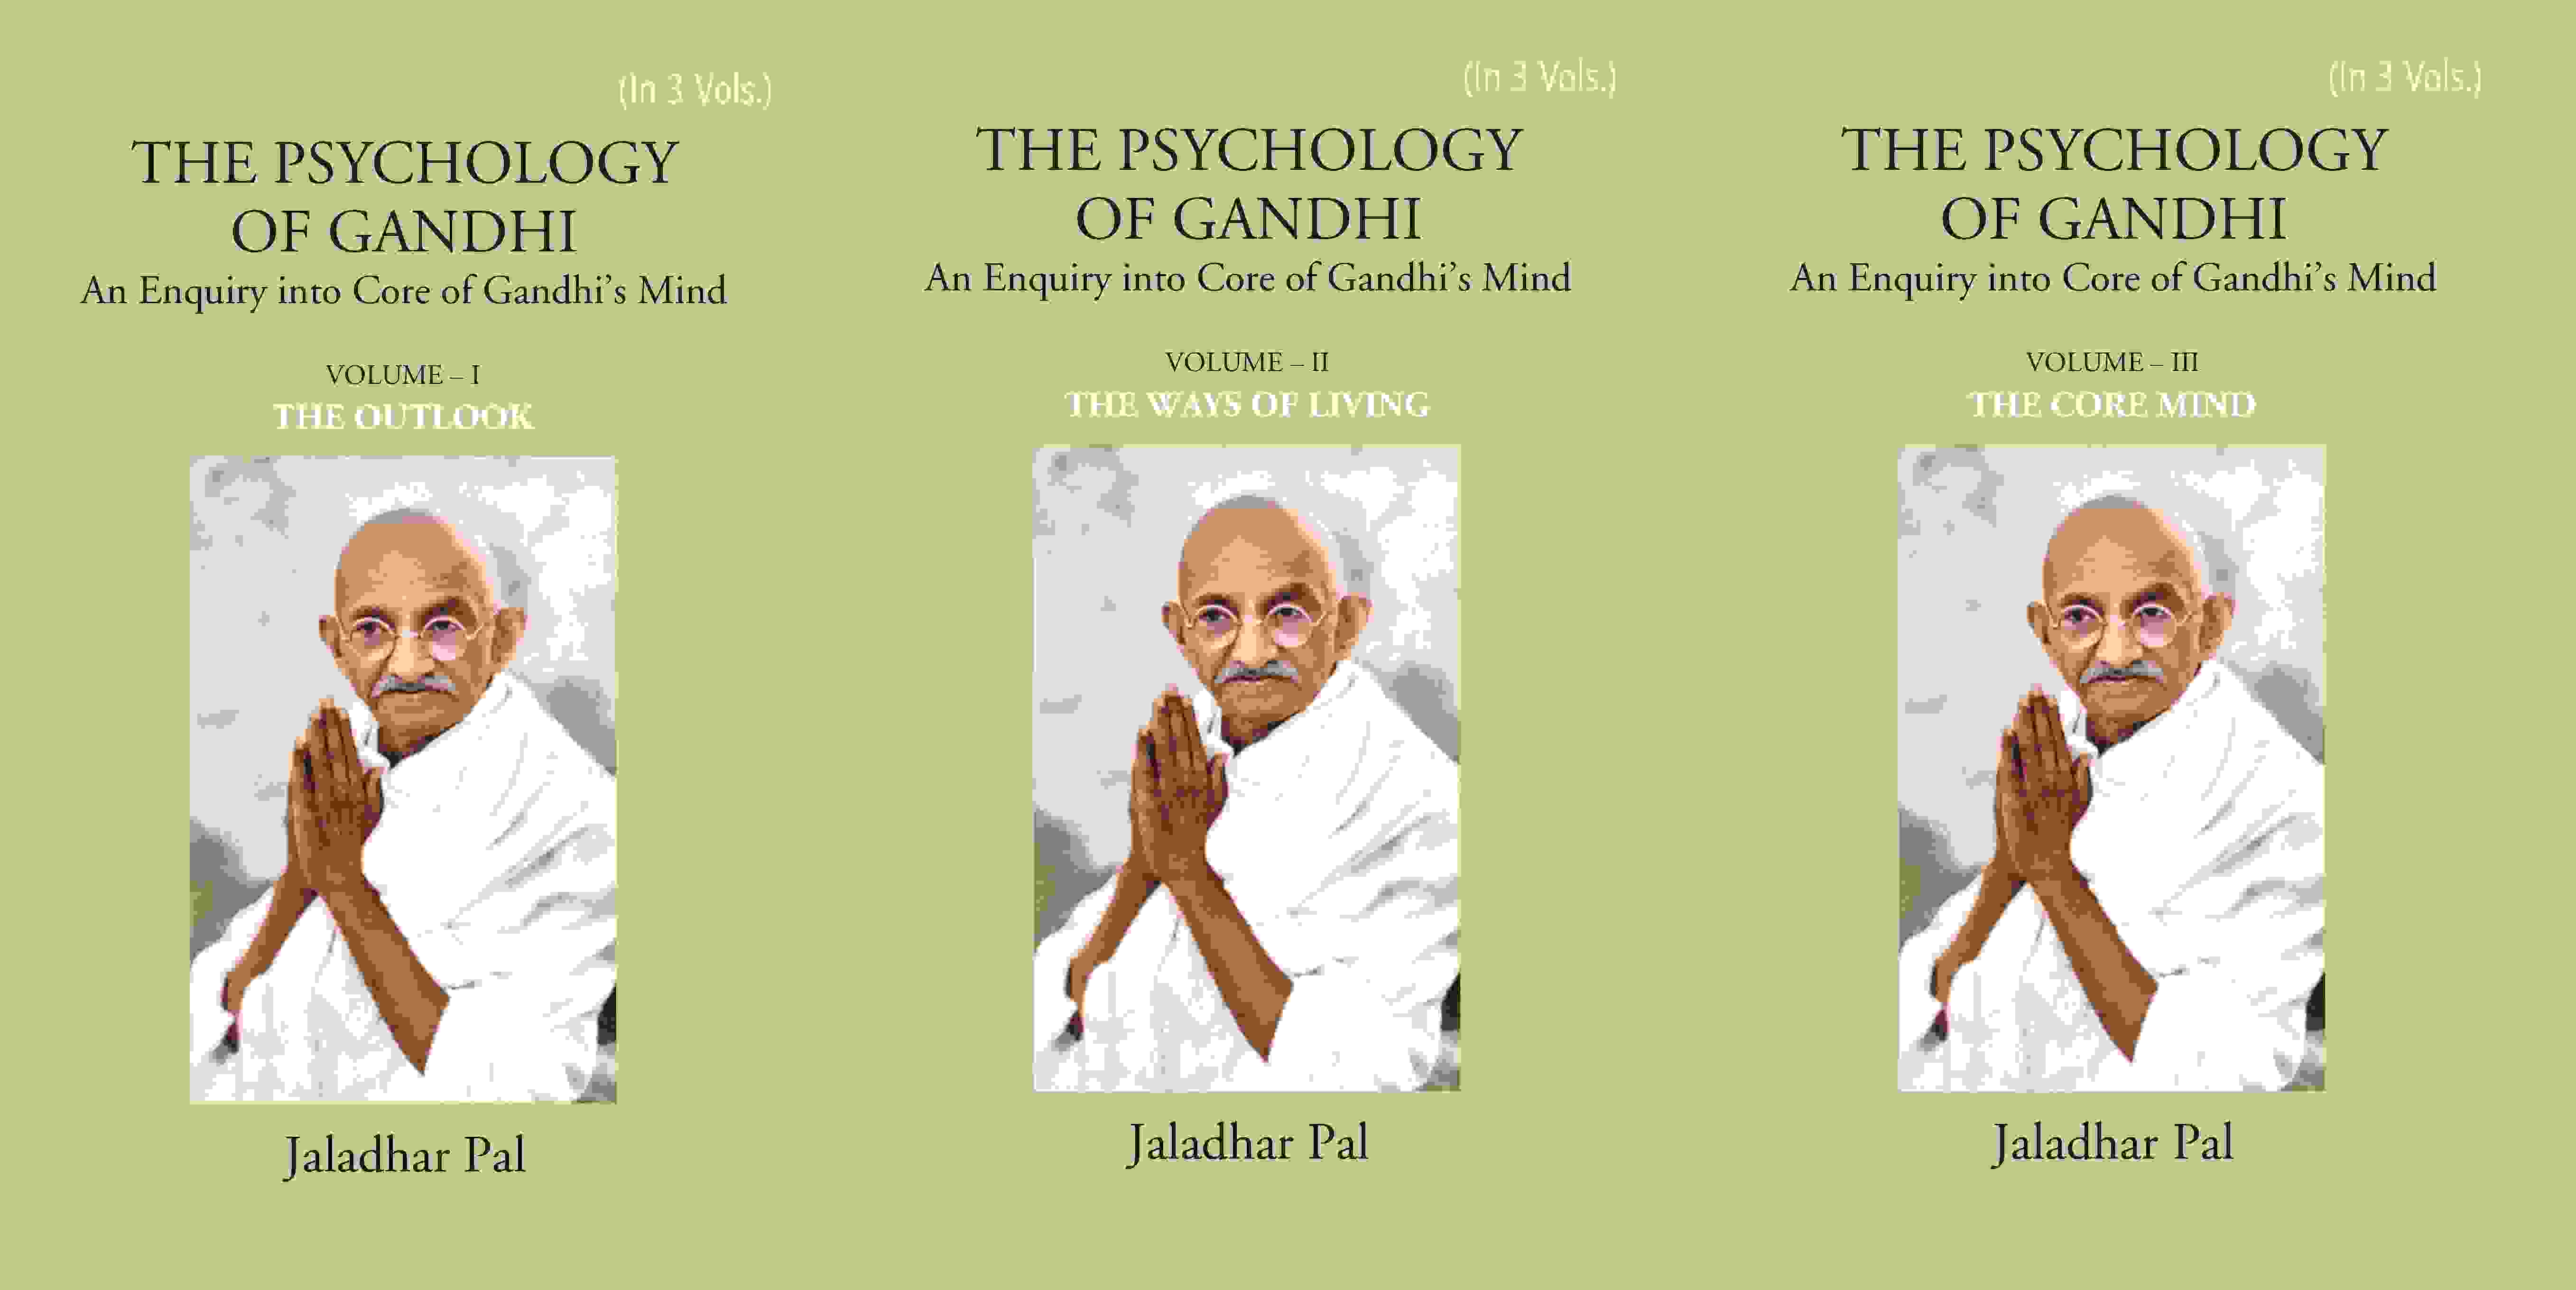 THE PSYCHOLOGY OF GANDHI: An Enquiry into Core of Gandhi’s Mind